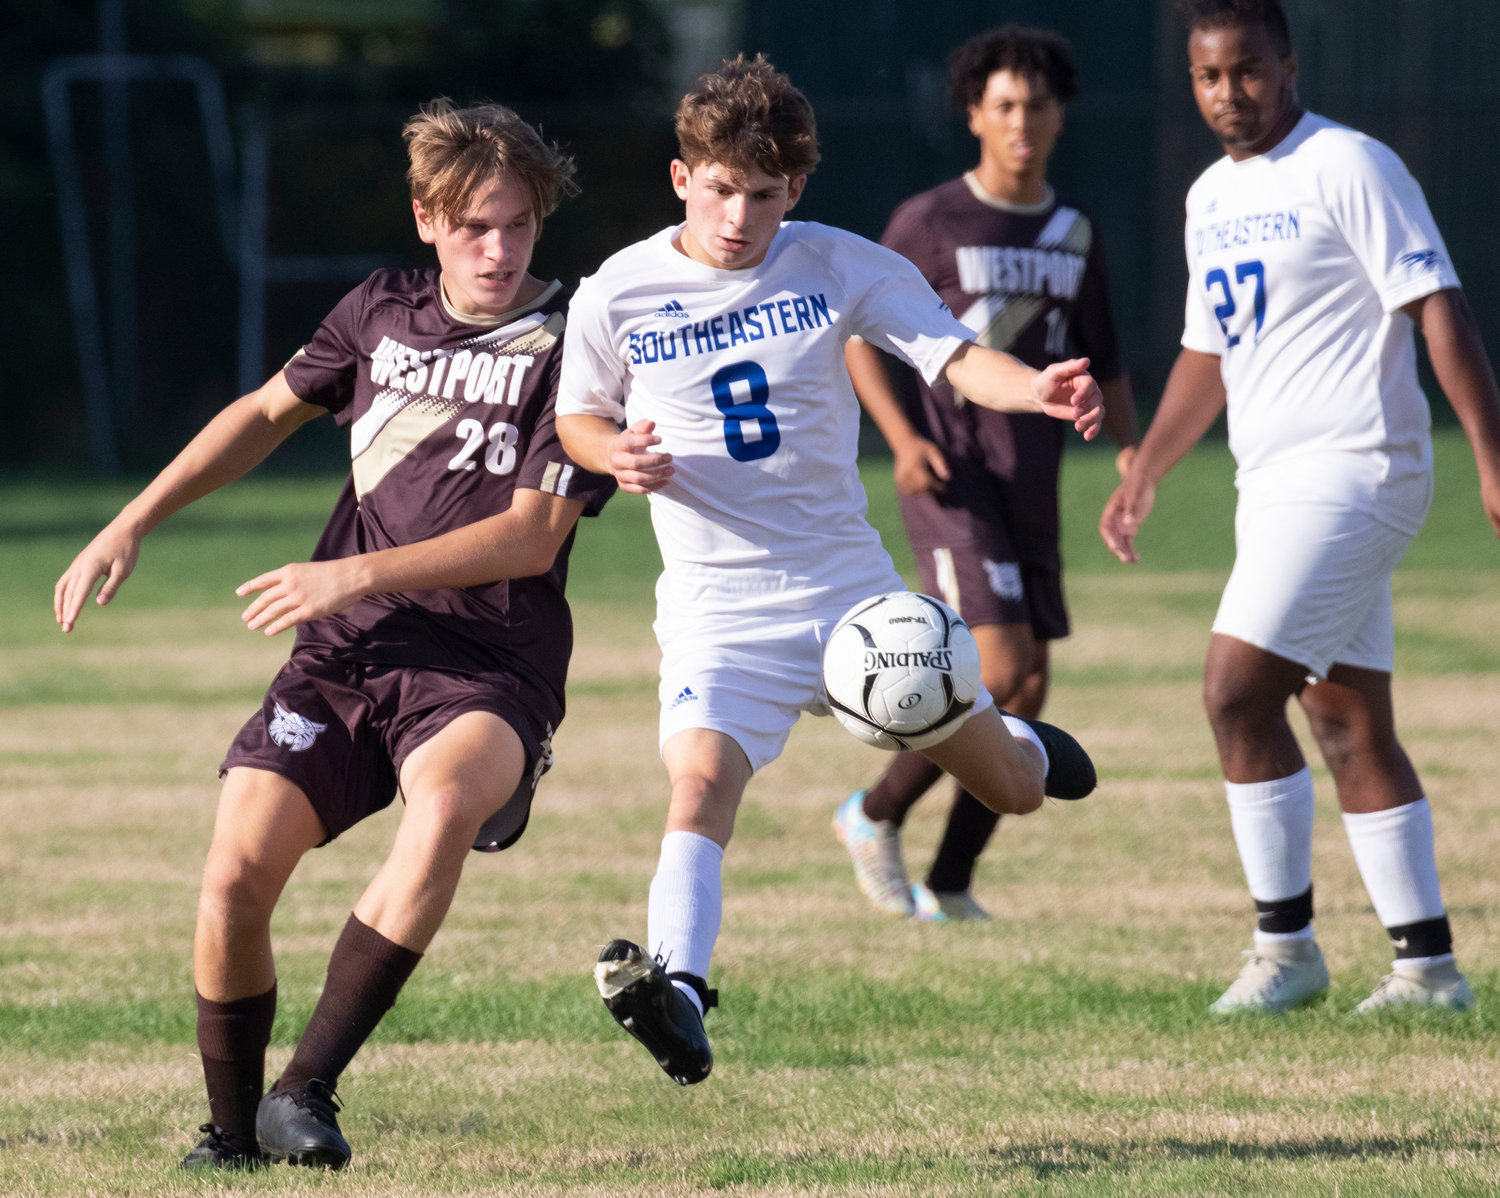 Center back Ryan Borges (left) and the defense have been stellar this season, helping Westport to limit opponents quality scoring opportunities.